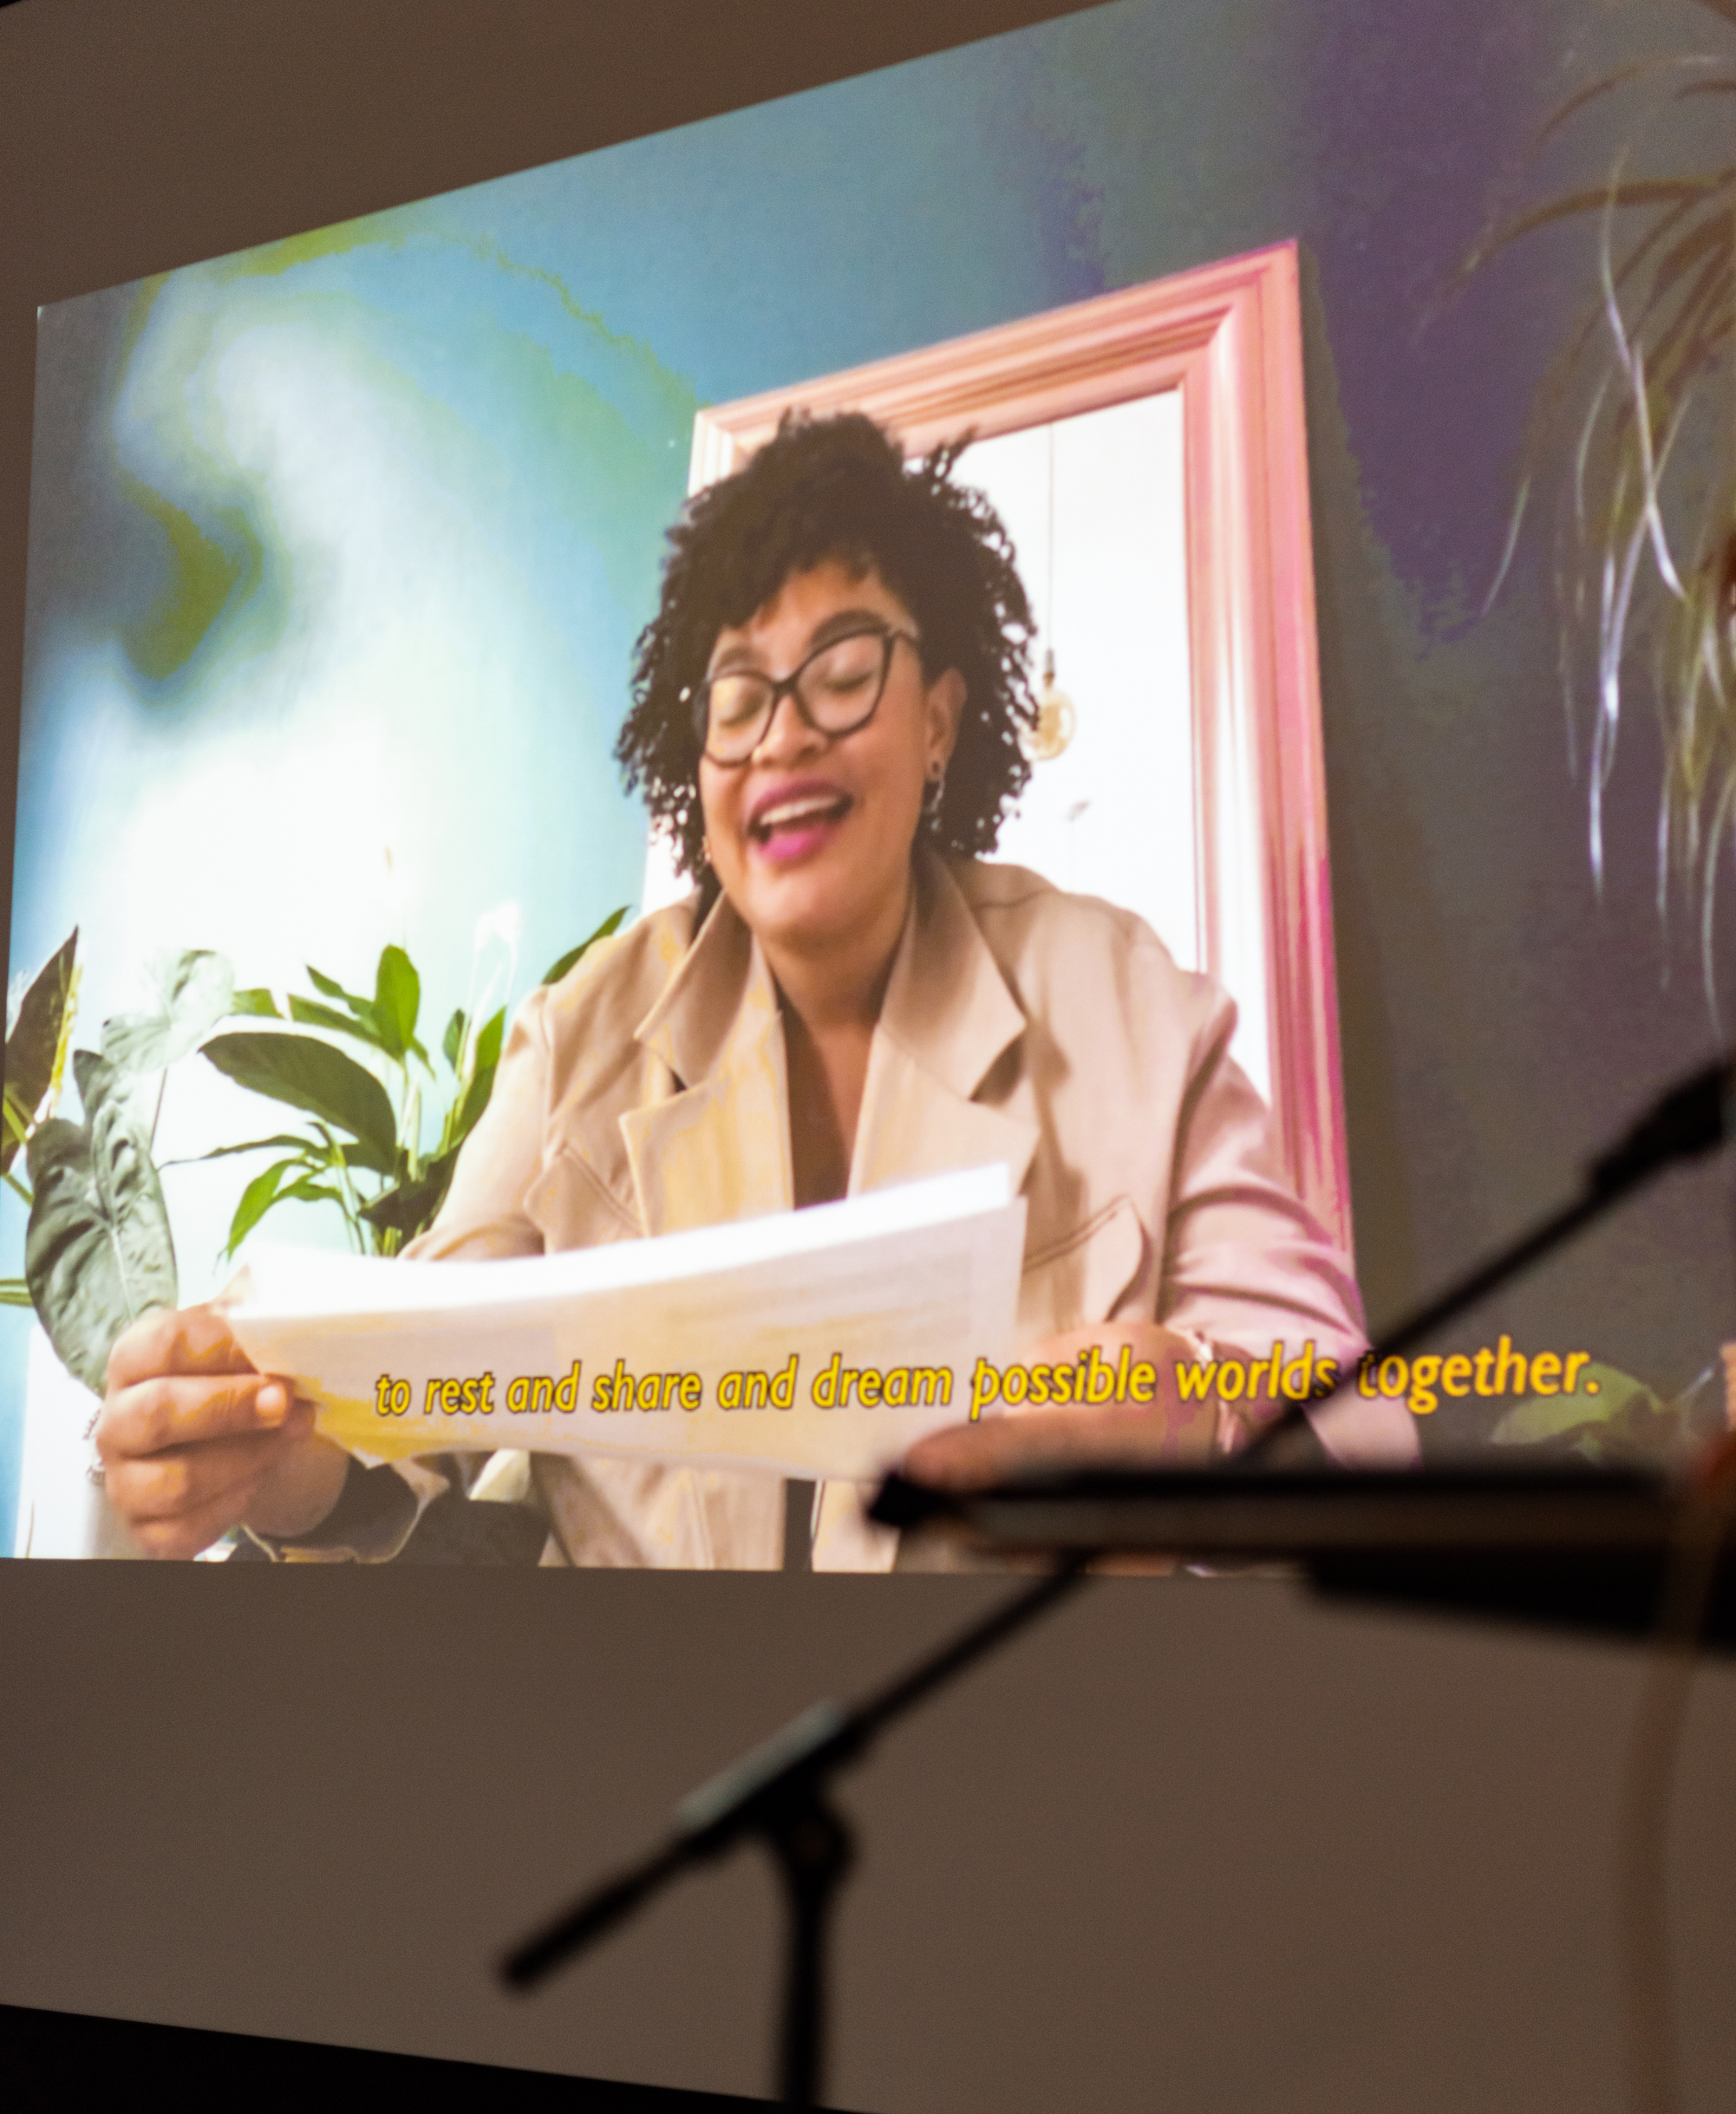 Ama Josephine Budge presenting her writing 'Pleasurable Ecologies – Formations of Care: The Impossibilities of Invitation' in a projector screen video broadcast.